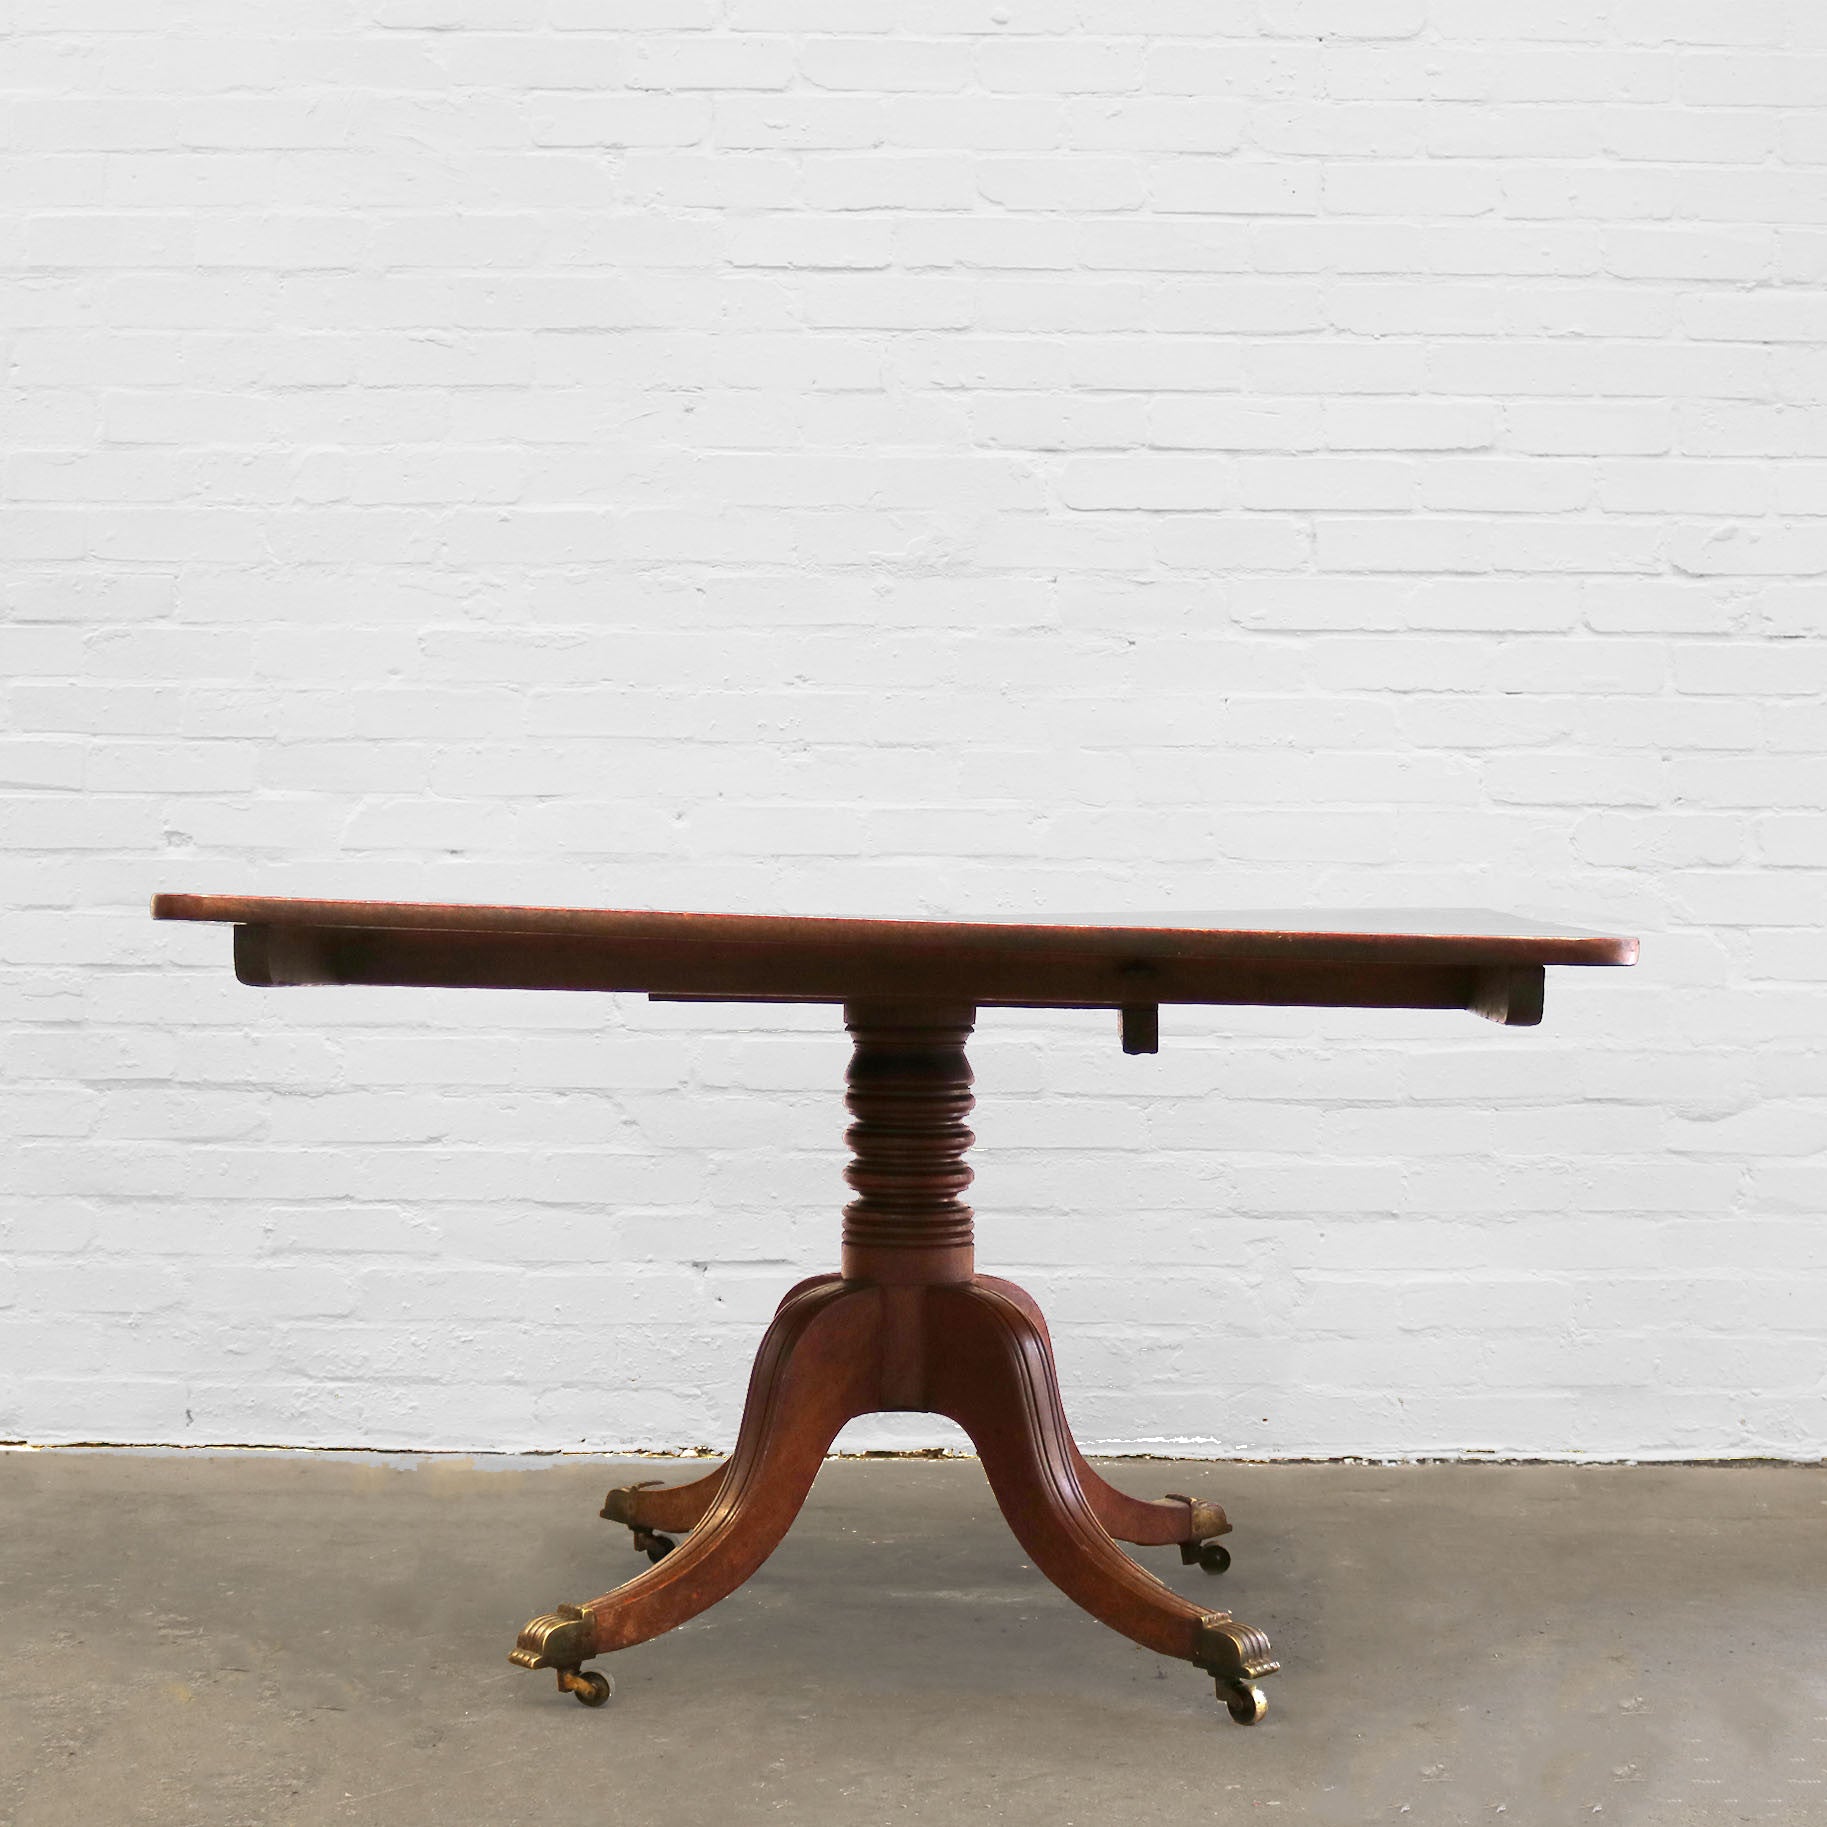 Antique Regency Mahogany Breakfast Table | The Architectural Forum